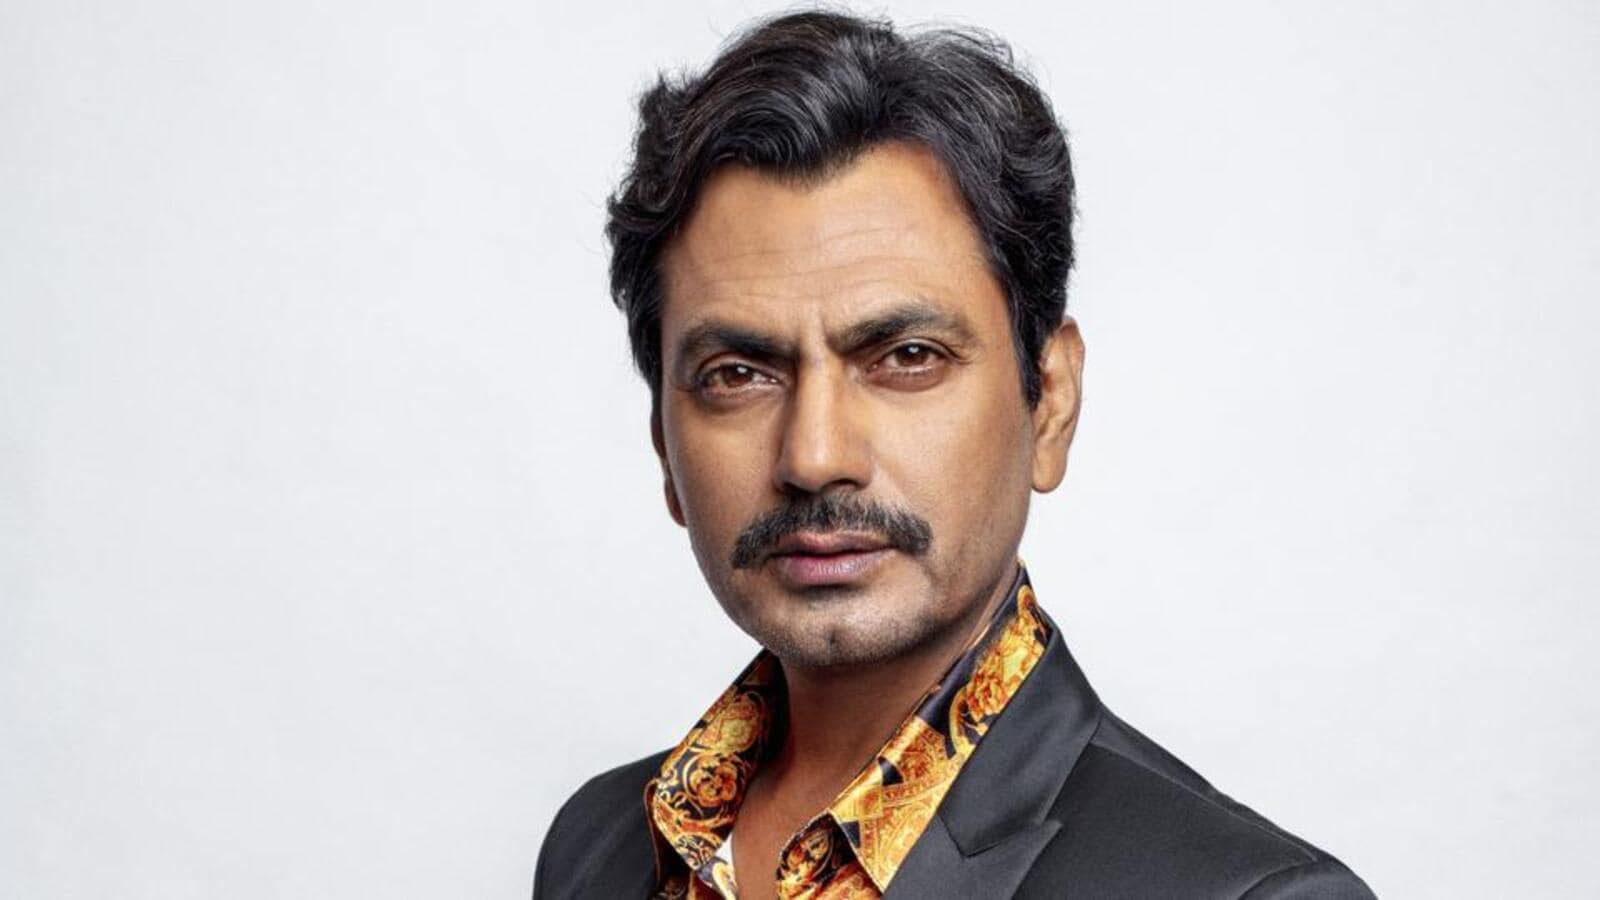 #IndiaAtCannes | Nawazuddin Siddiqui: Only good cinema talked about here, not box office collections